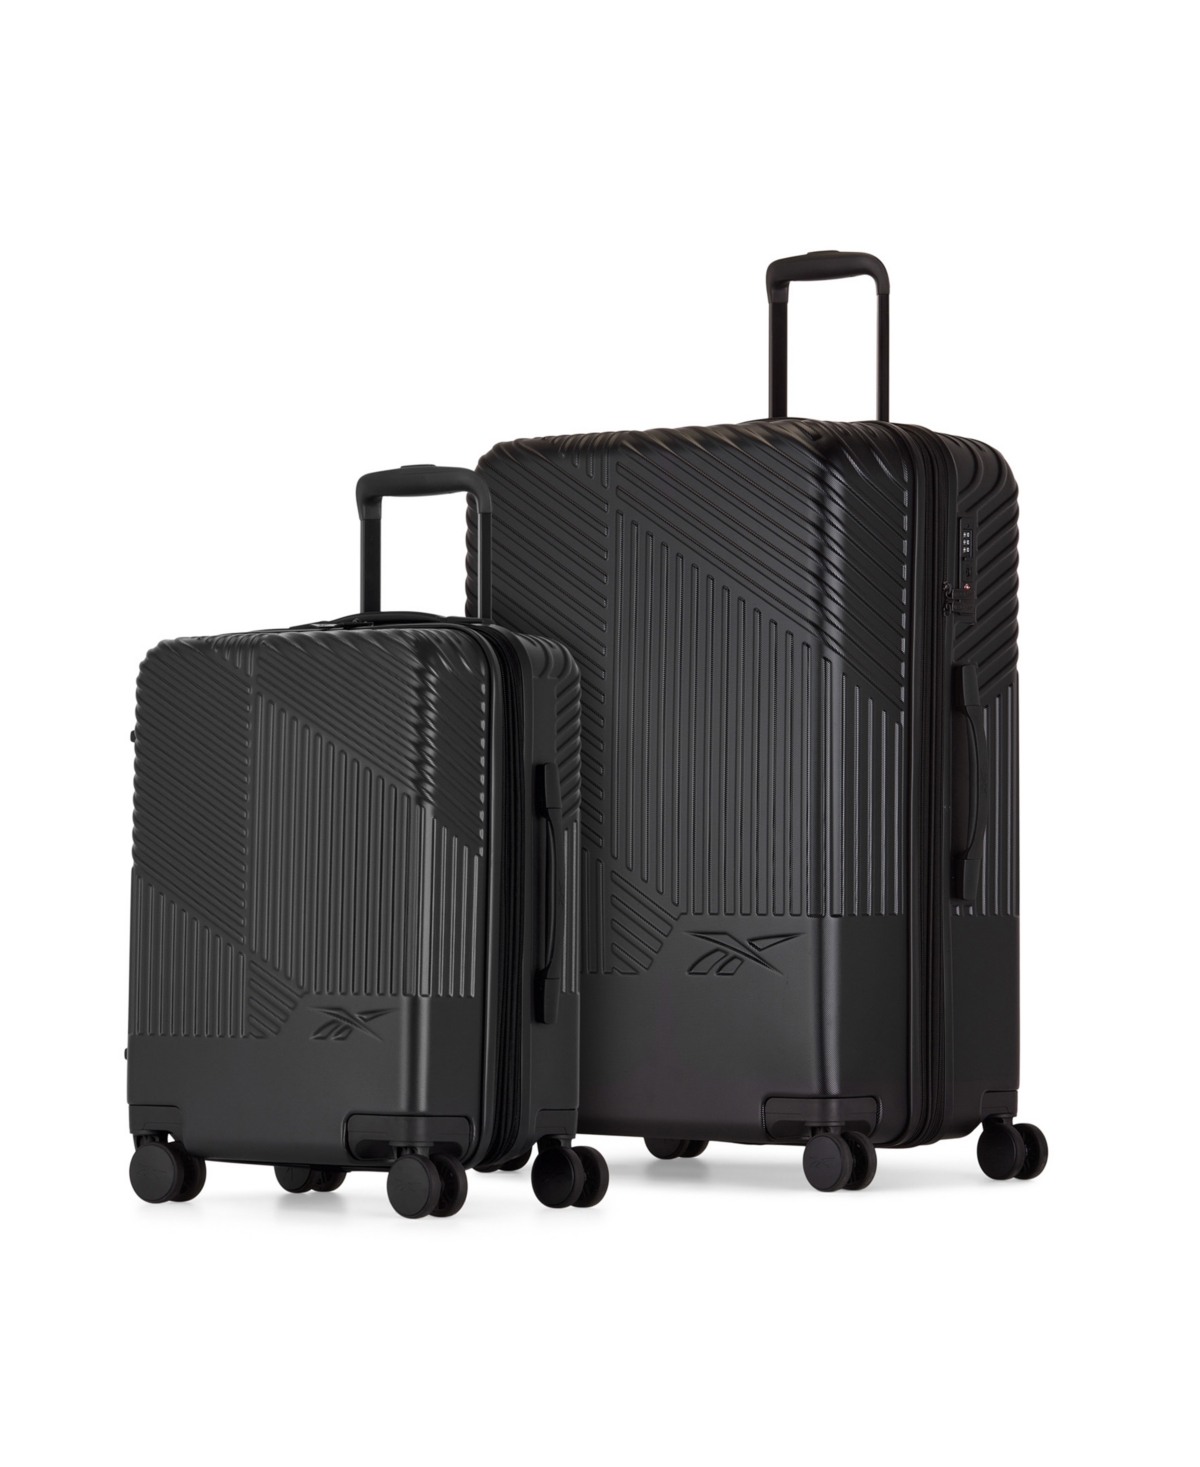 Playmaker 2 Pieces 360-degree Spinner Luggage - Black